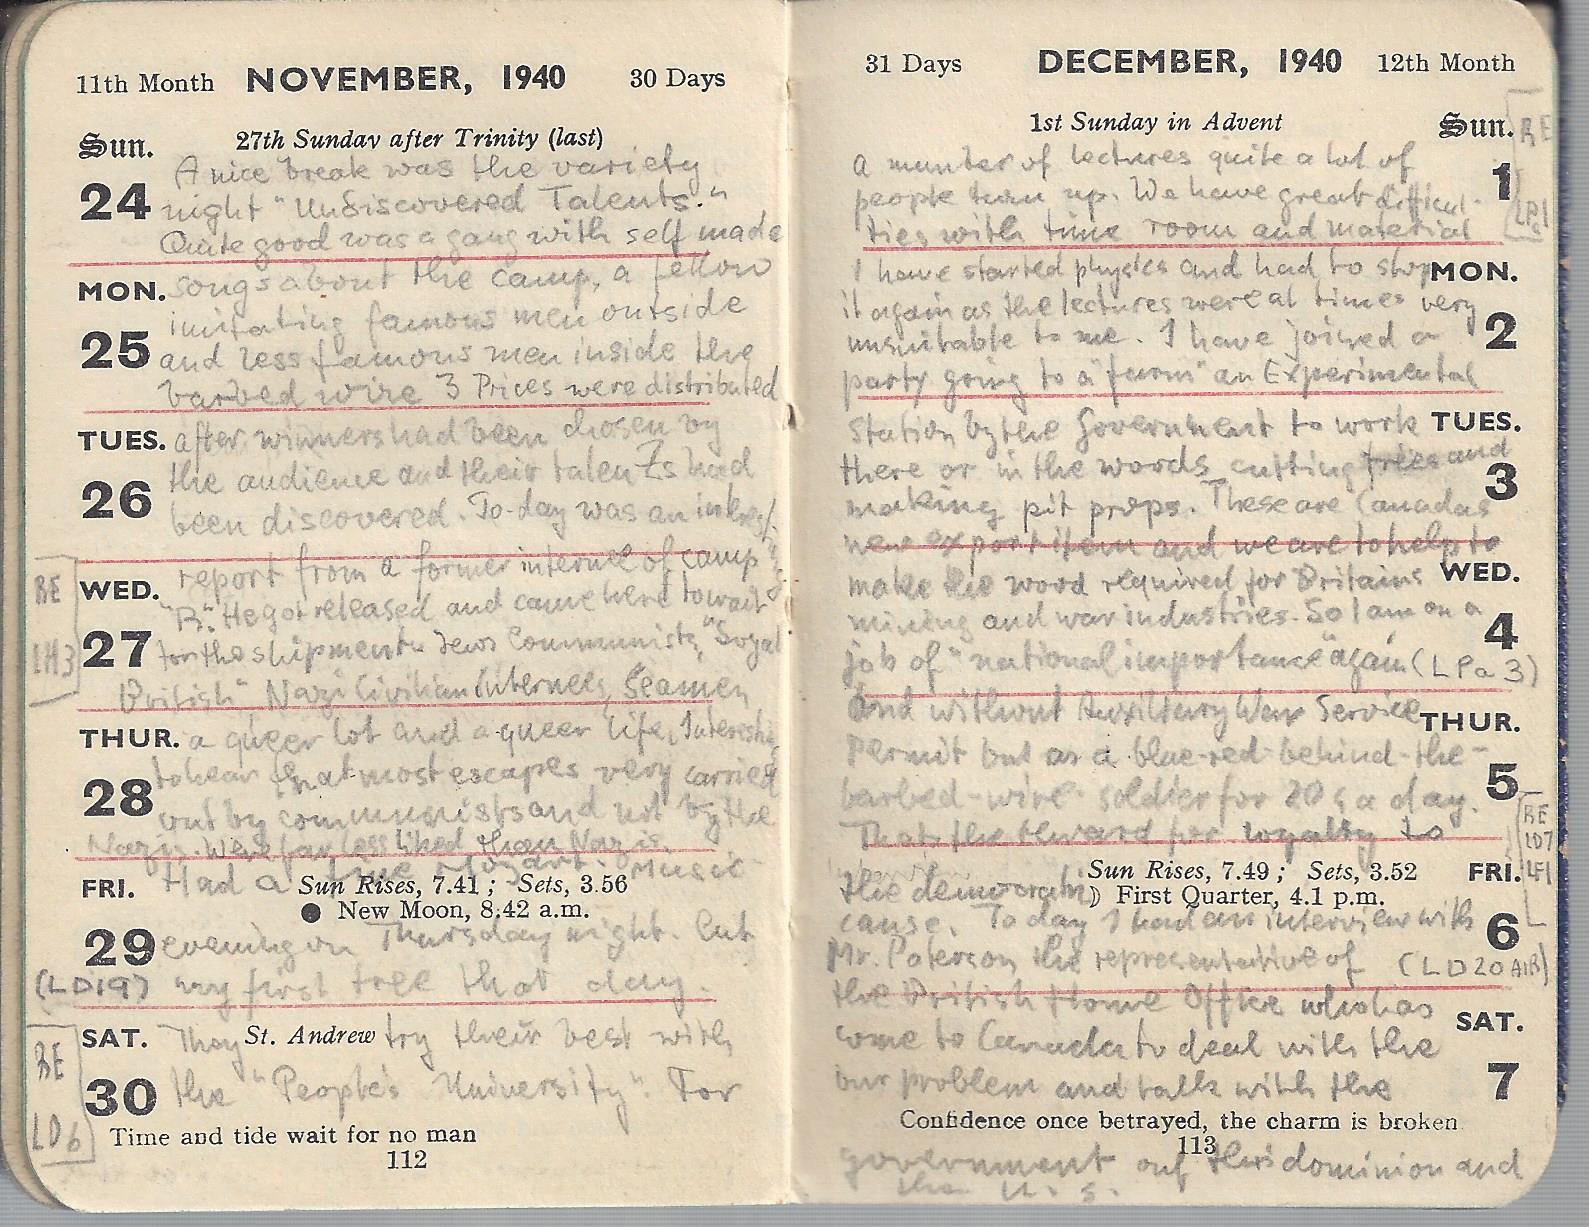 Photo of entry in Heinrich Pfeil's diary, 1940-1941 